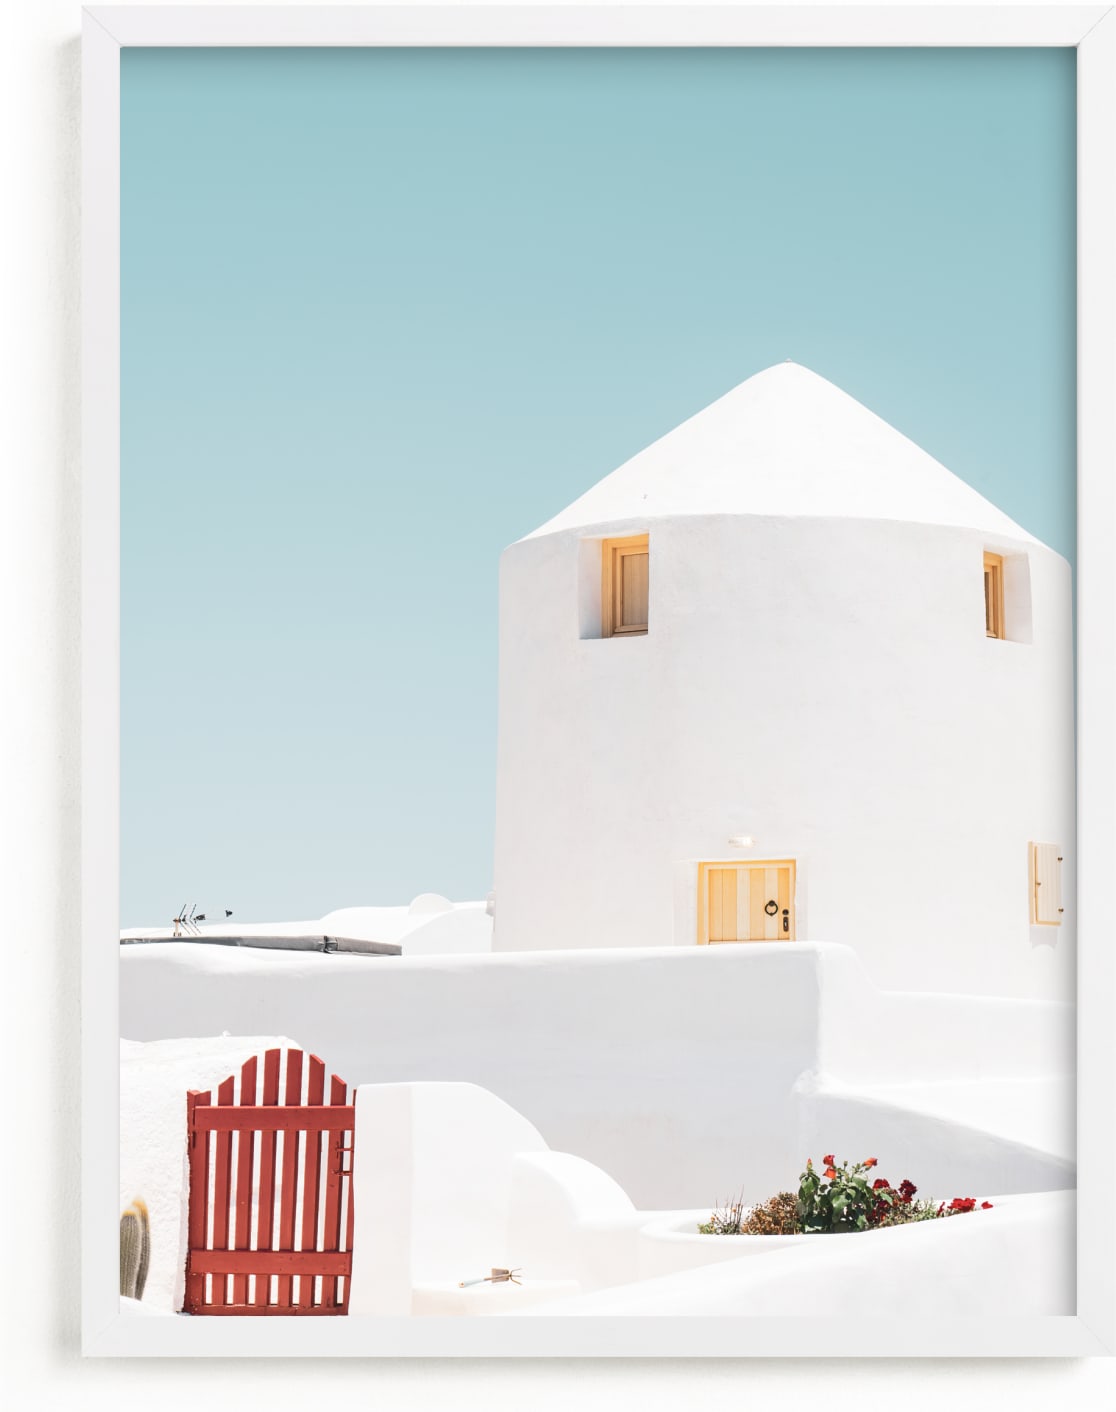 This is a blue art by Tania Medeiros called Cycladic House II.